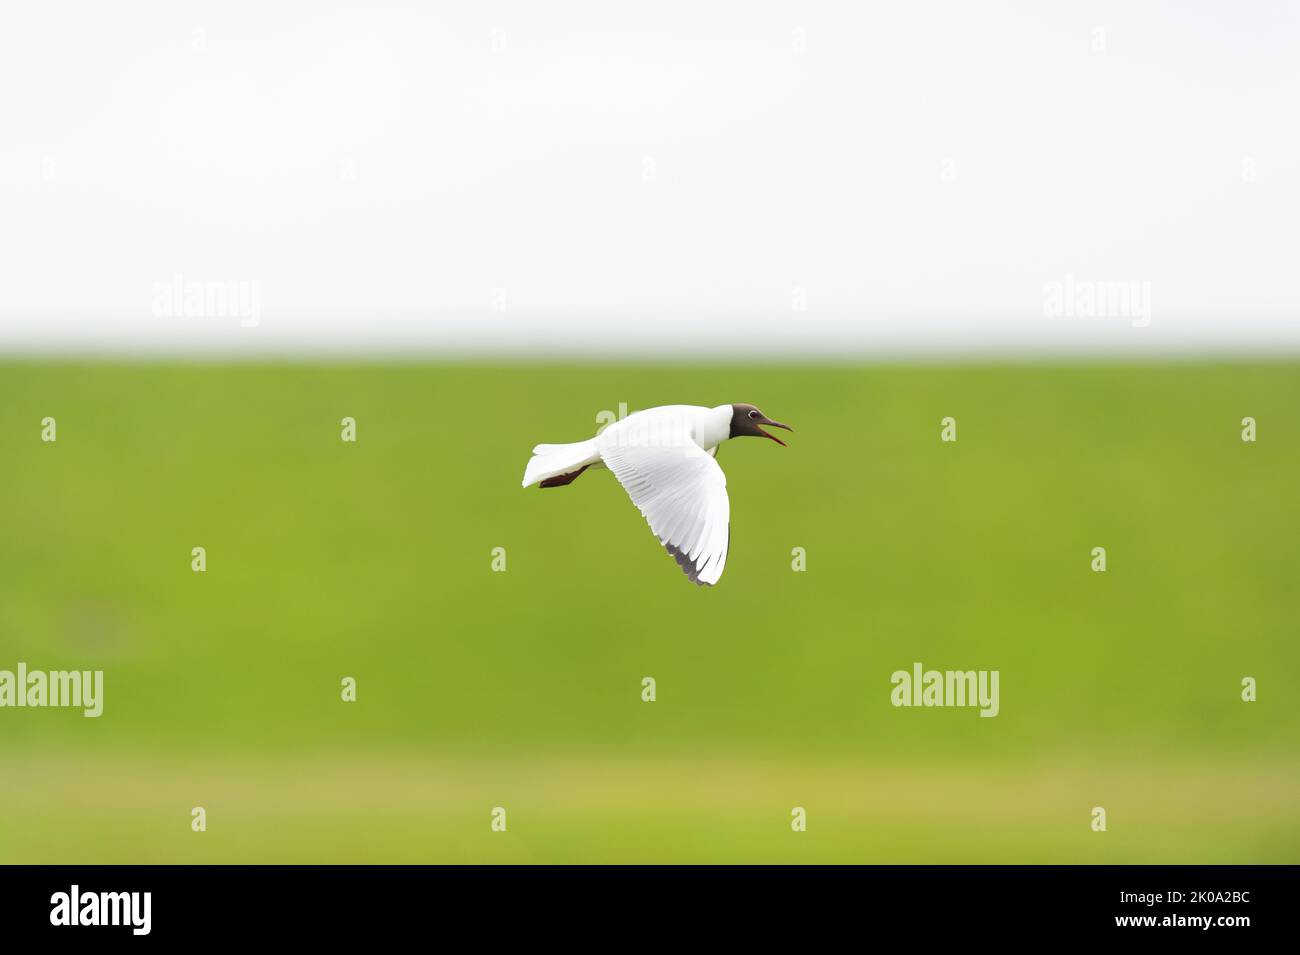 Black headed gull flying in the air Stock Photo